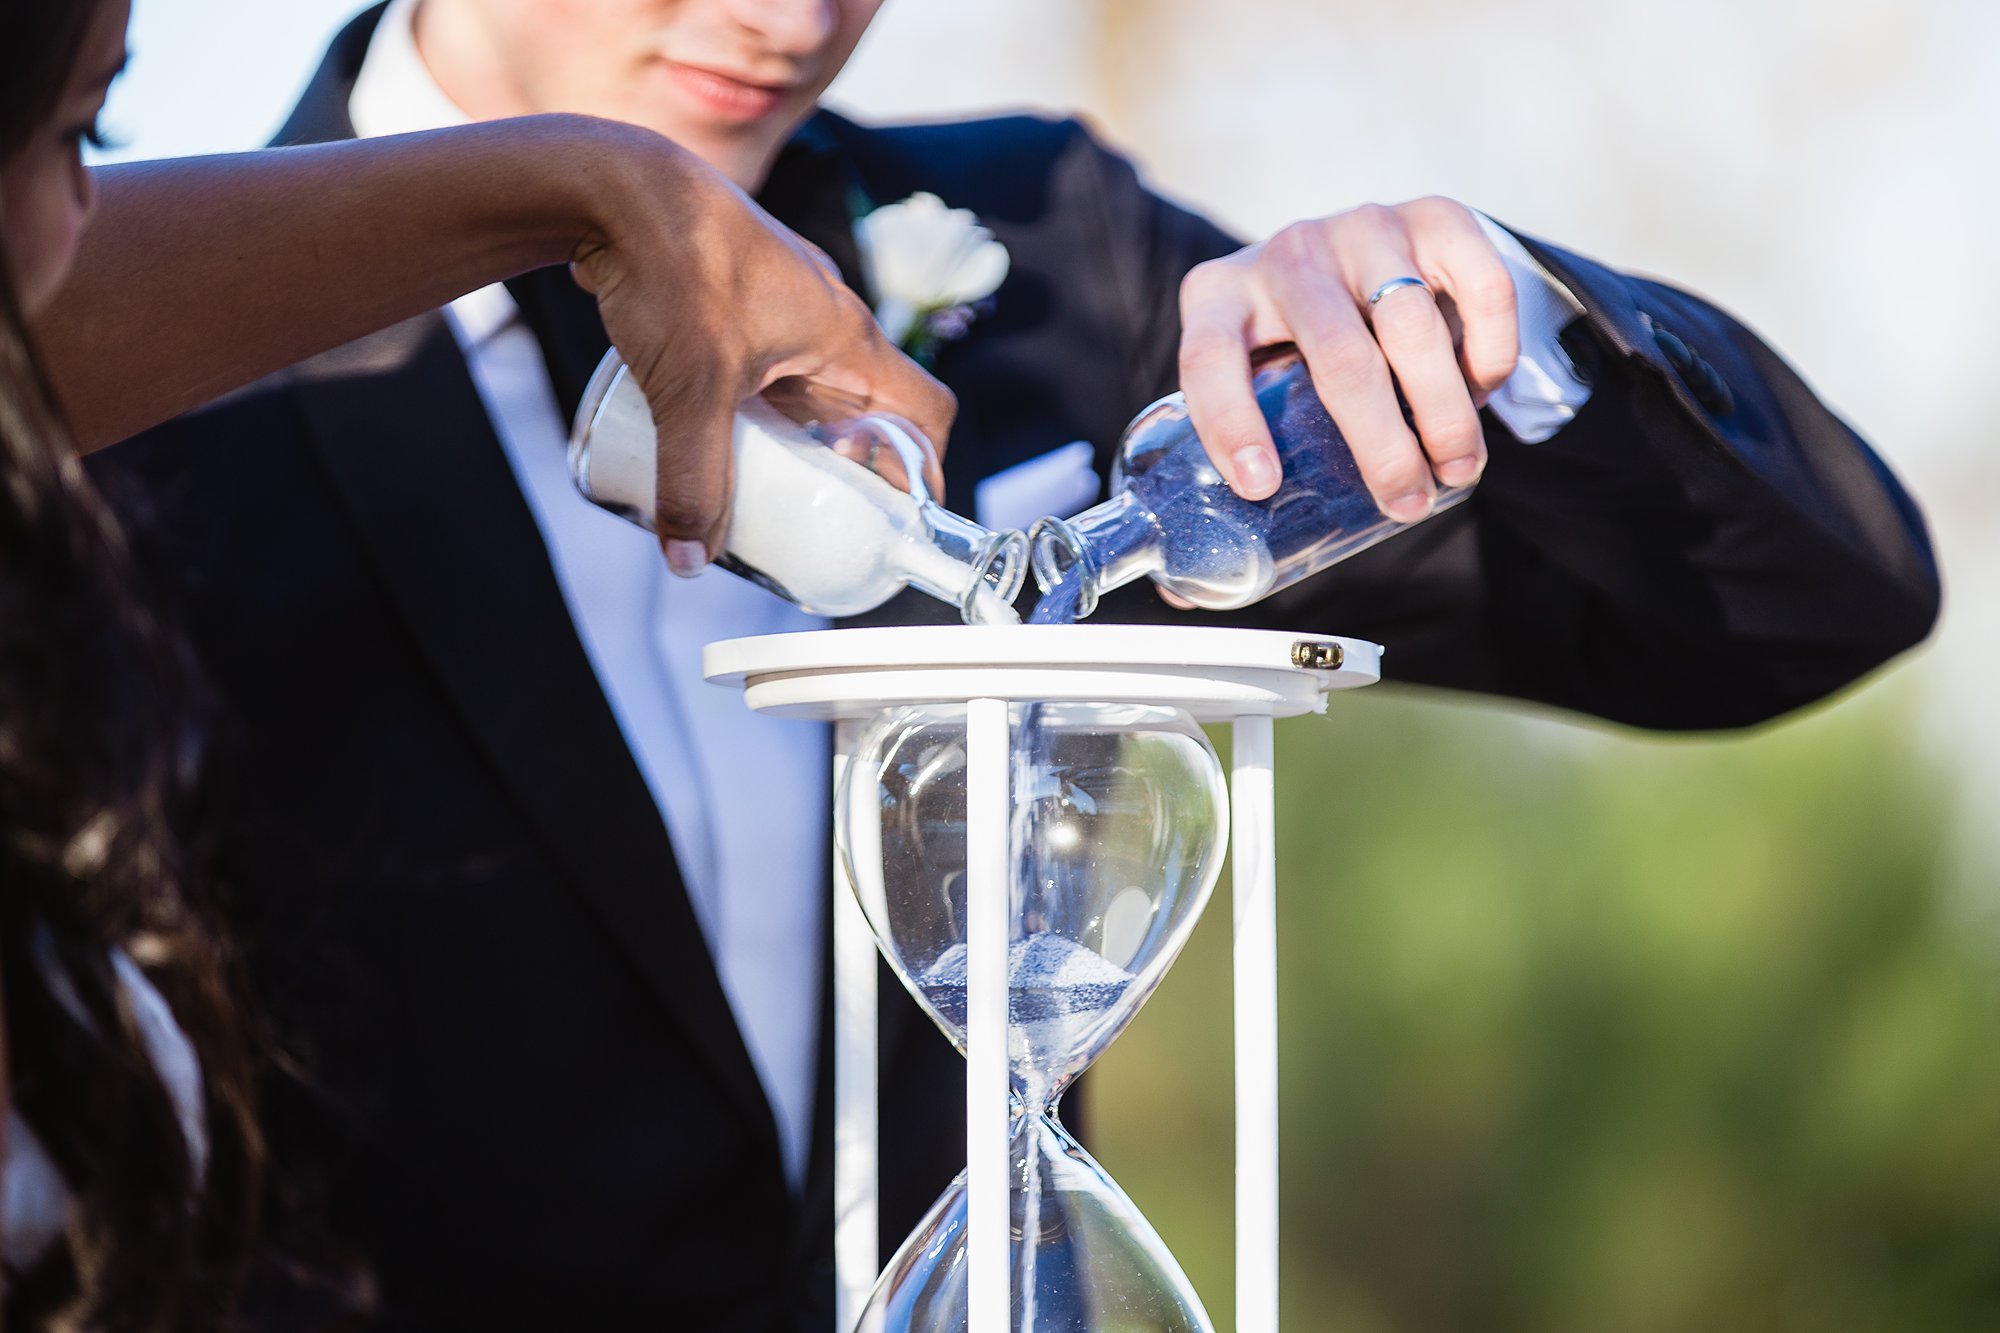 Bride and groom adding sand to an hour glass as their unity ceremony during wedding ceremony at the Rio Salado Audubon by Phoenix wedding photographers PMA Photography.